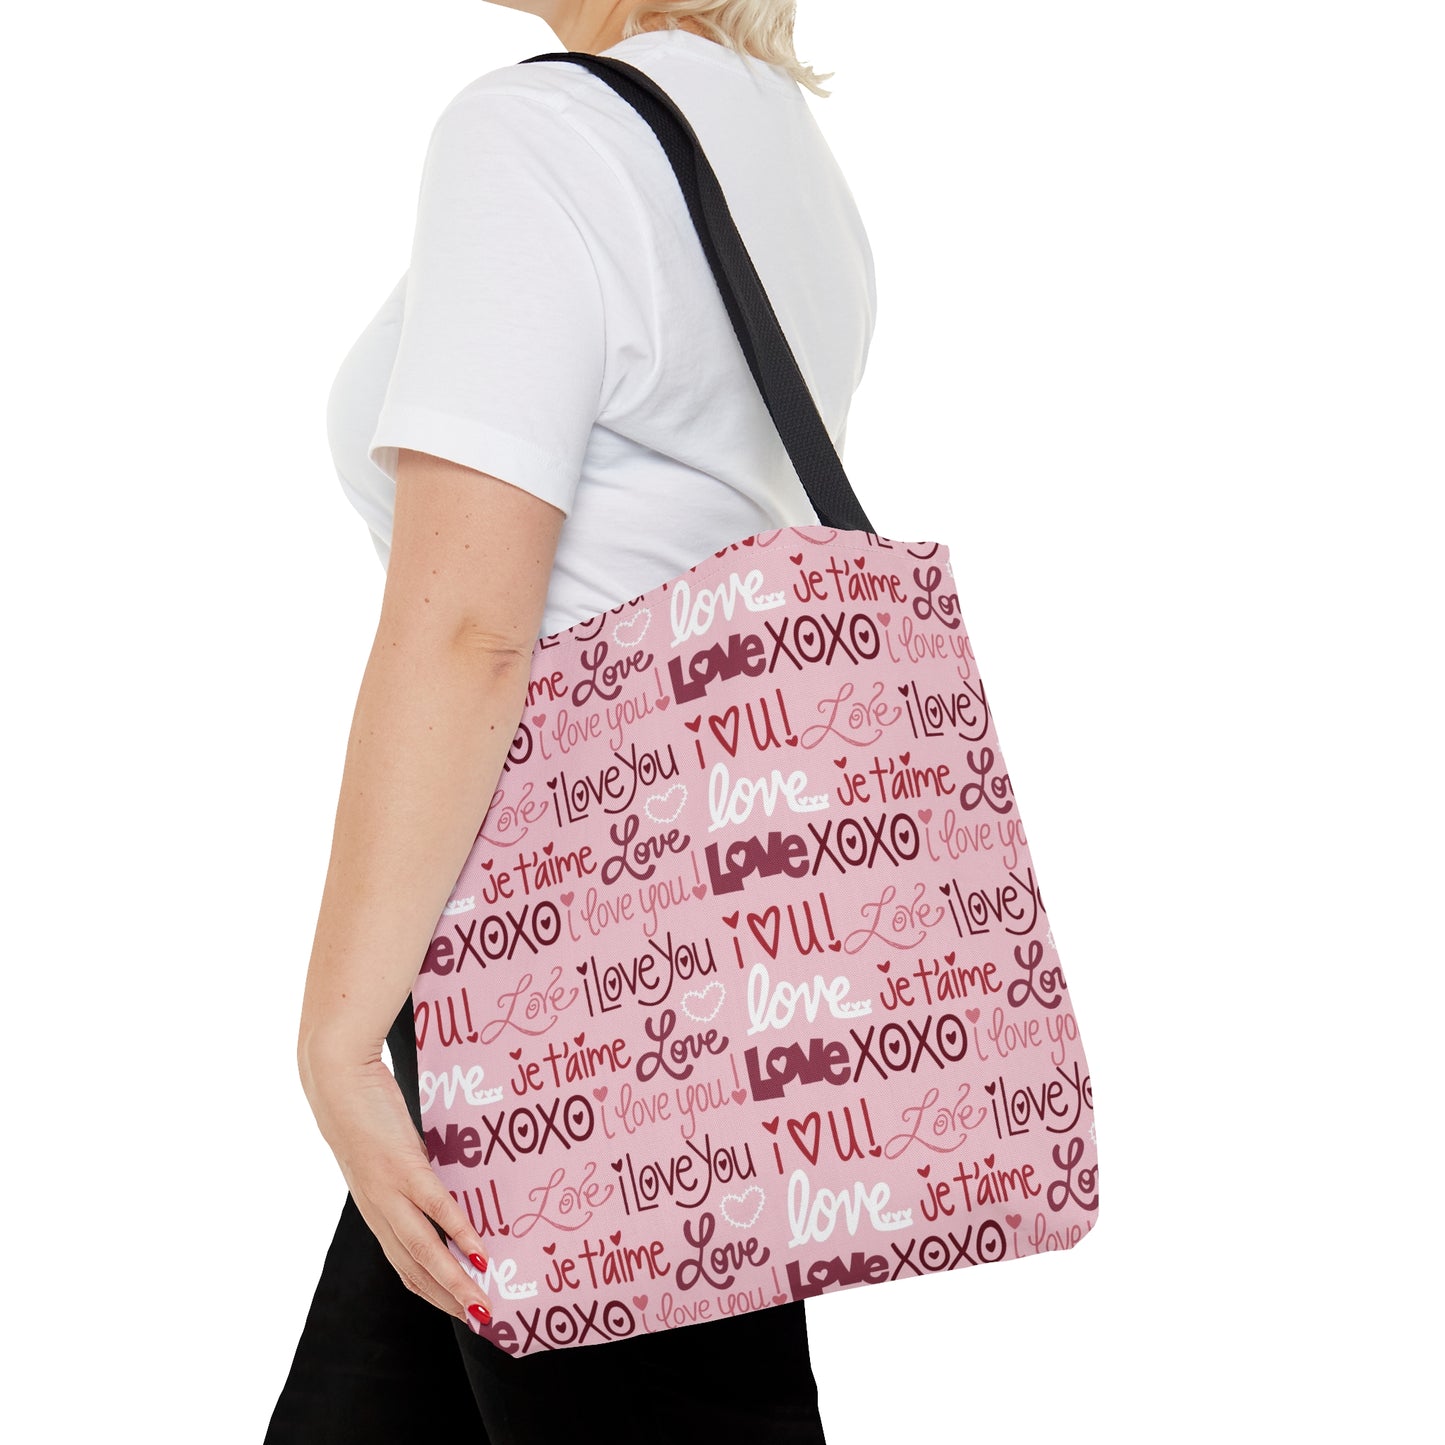 I Love You - LOVE - Pink, Red, White - Hearts - Practical. high-quality Tote Bag